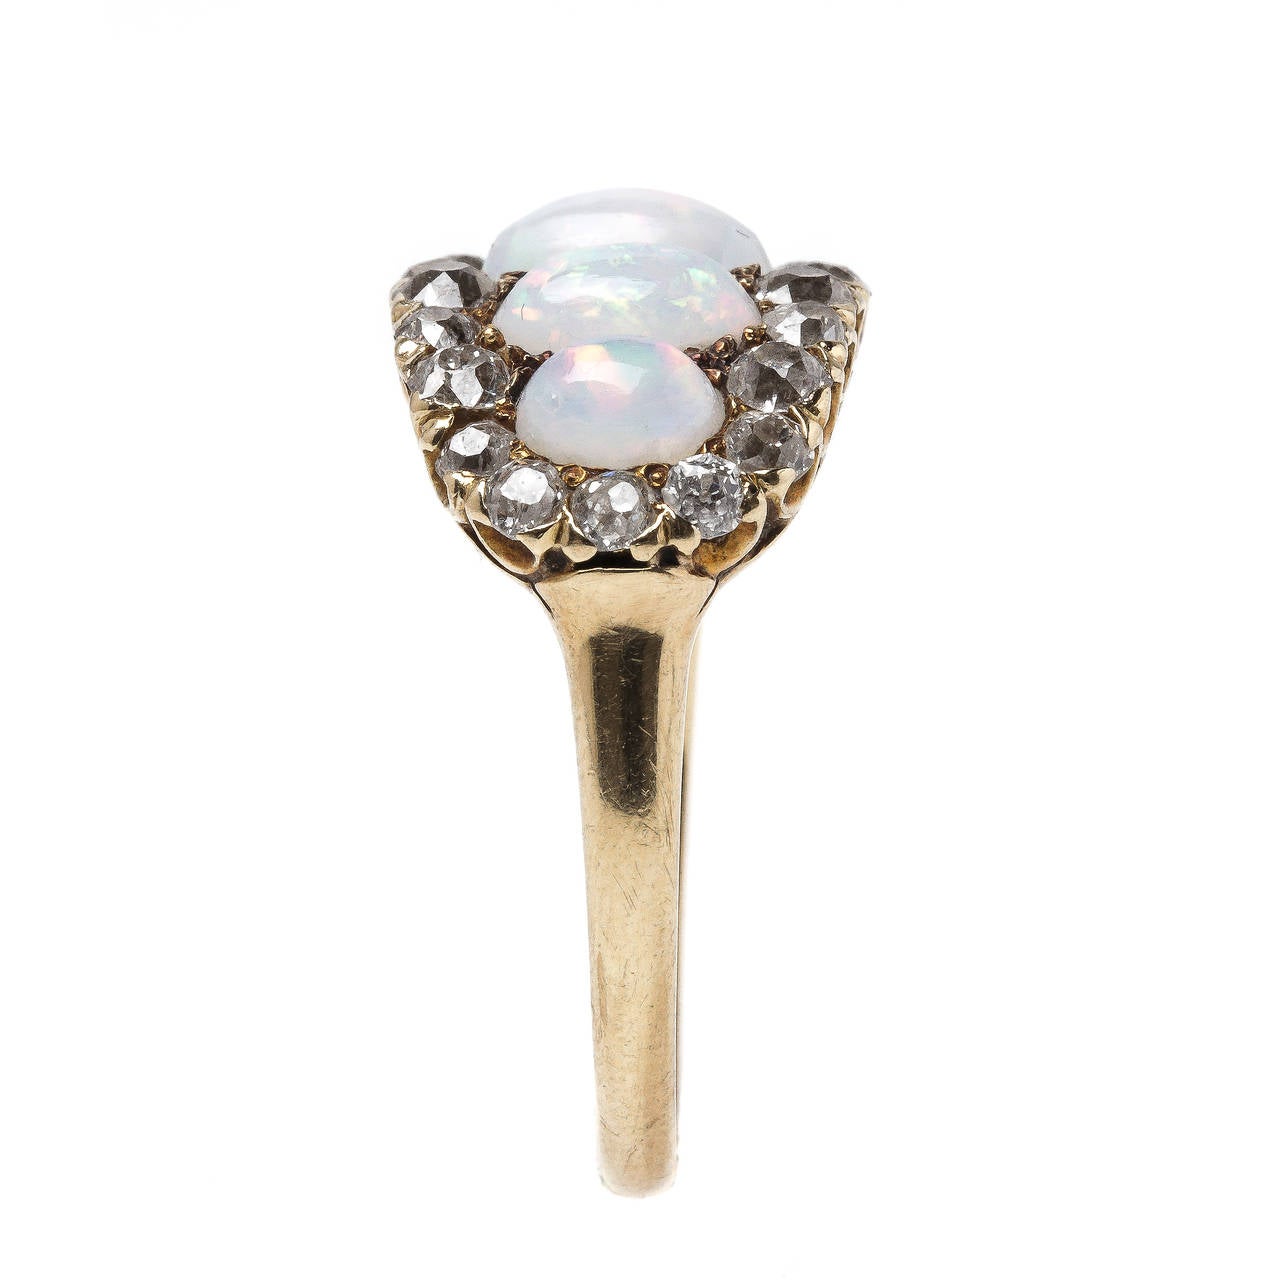 Whimsical Victorian Era Opal Ring with Old Mine Cut Diamond Halo 1